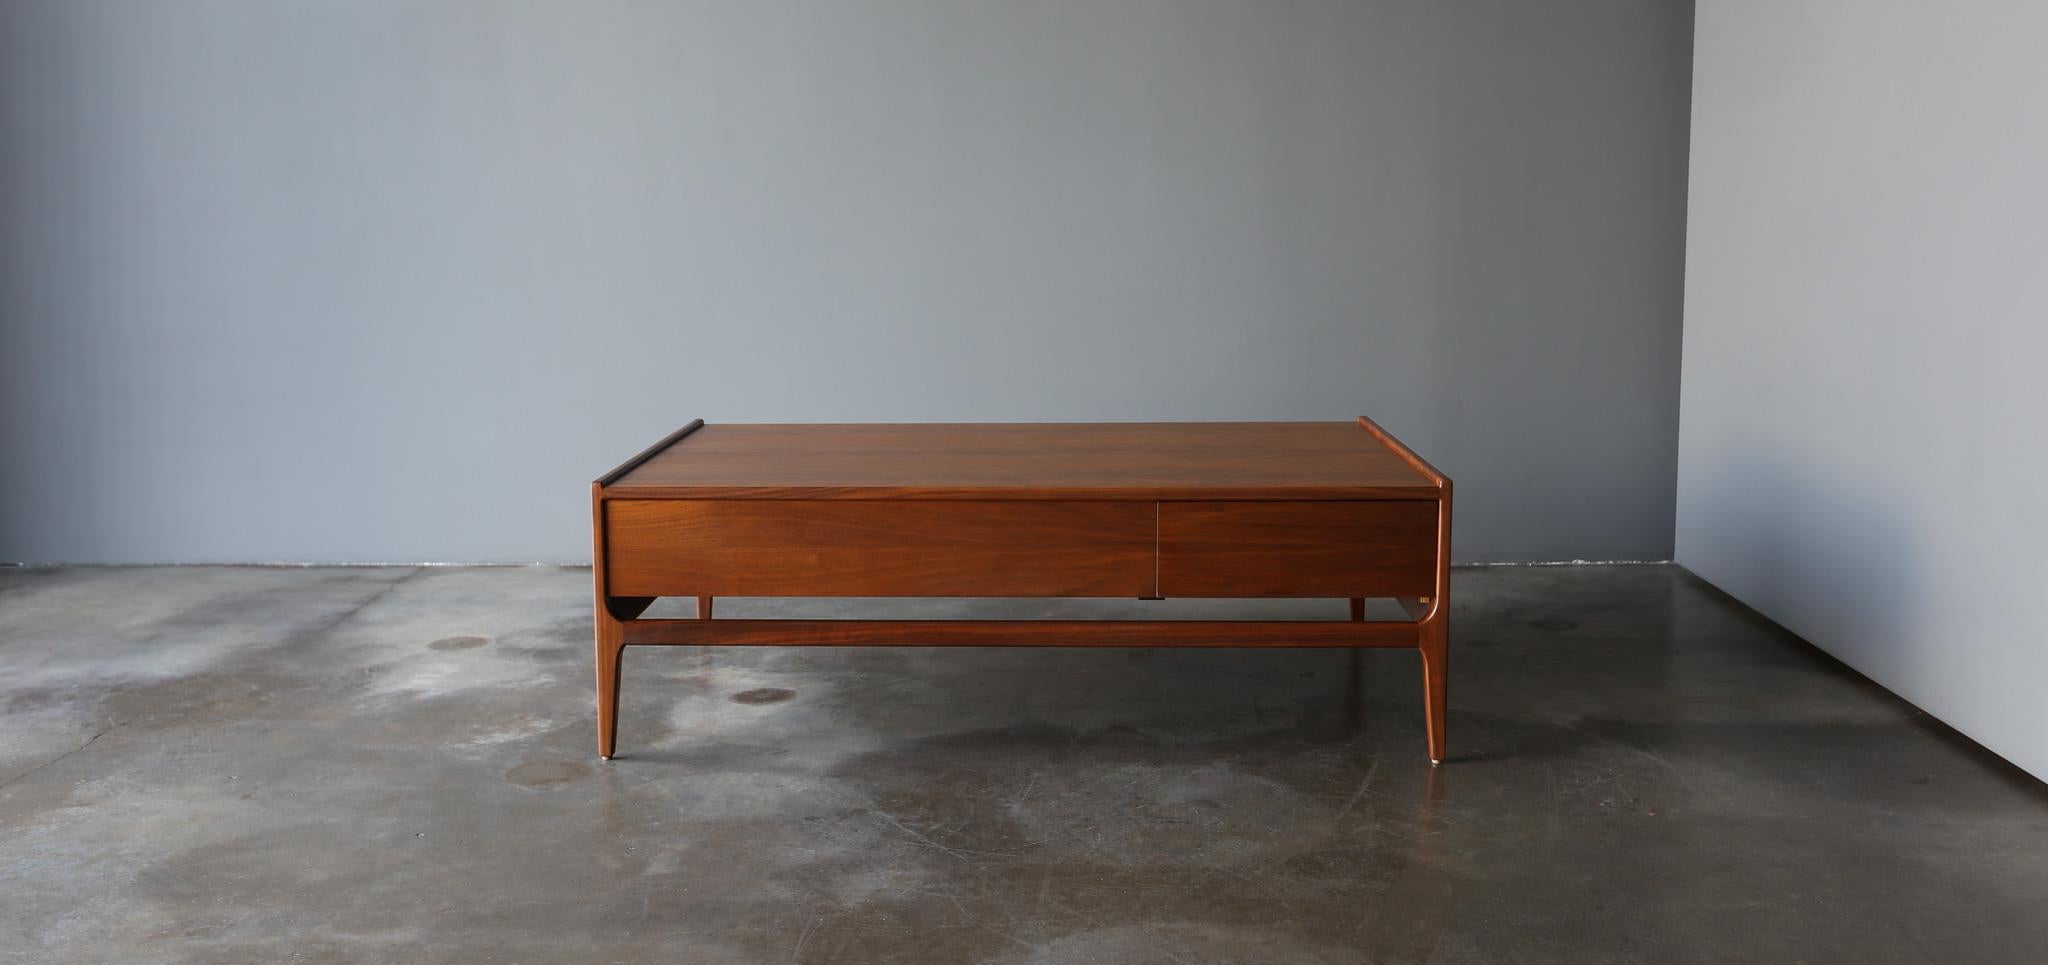 Richard Thompson Walnut Coffee Table for Glenn of California, c.1965.  This piece has been professionally restored.